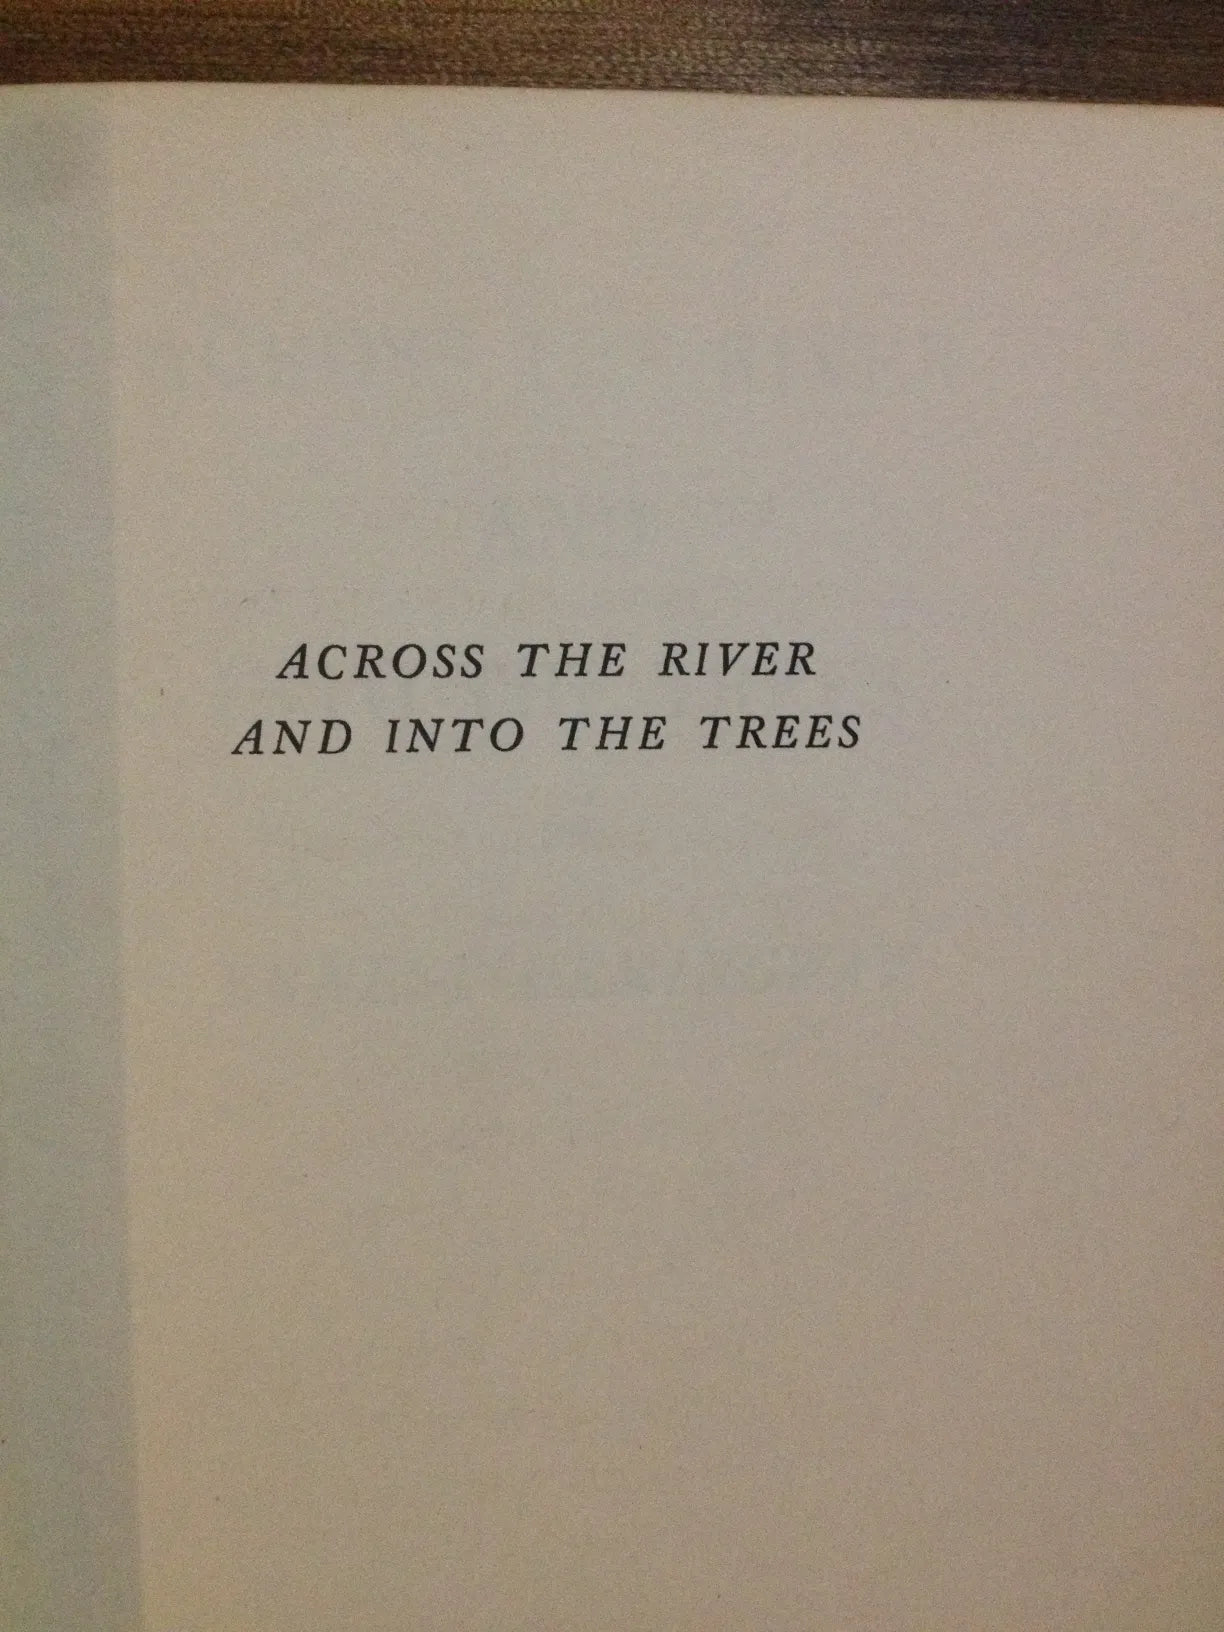 ACROSS THE RIVER AND INTO THE TREES BY: ERNEST HEMINGWAY BooksCardsNBikes